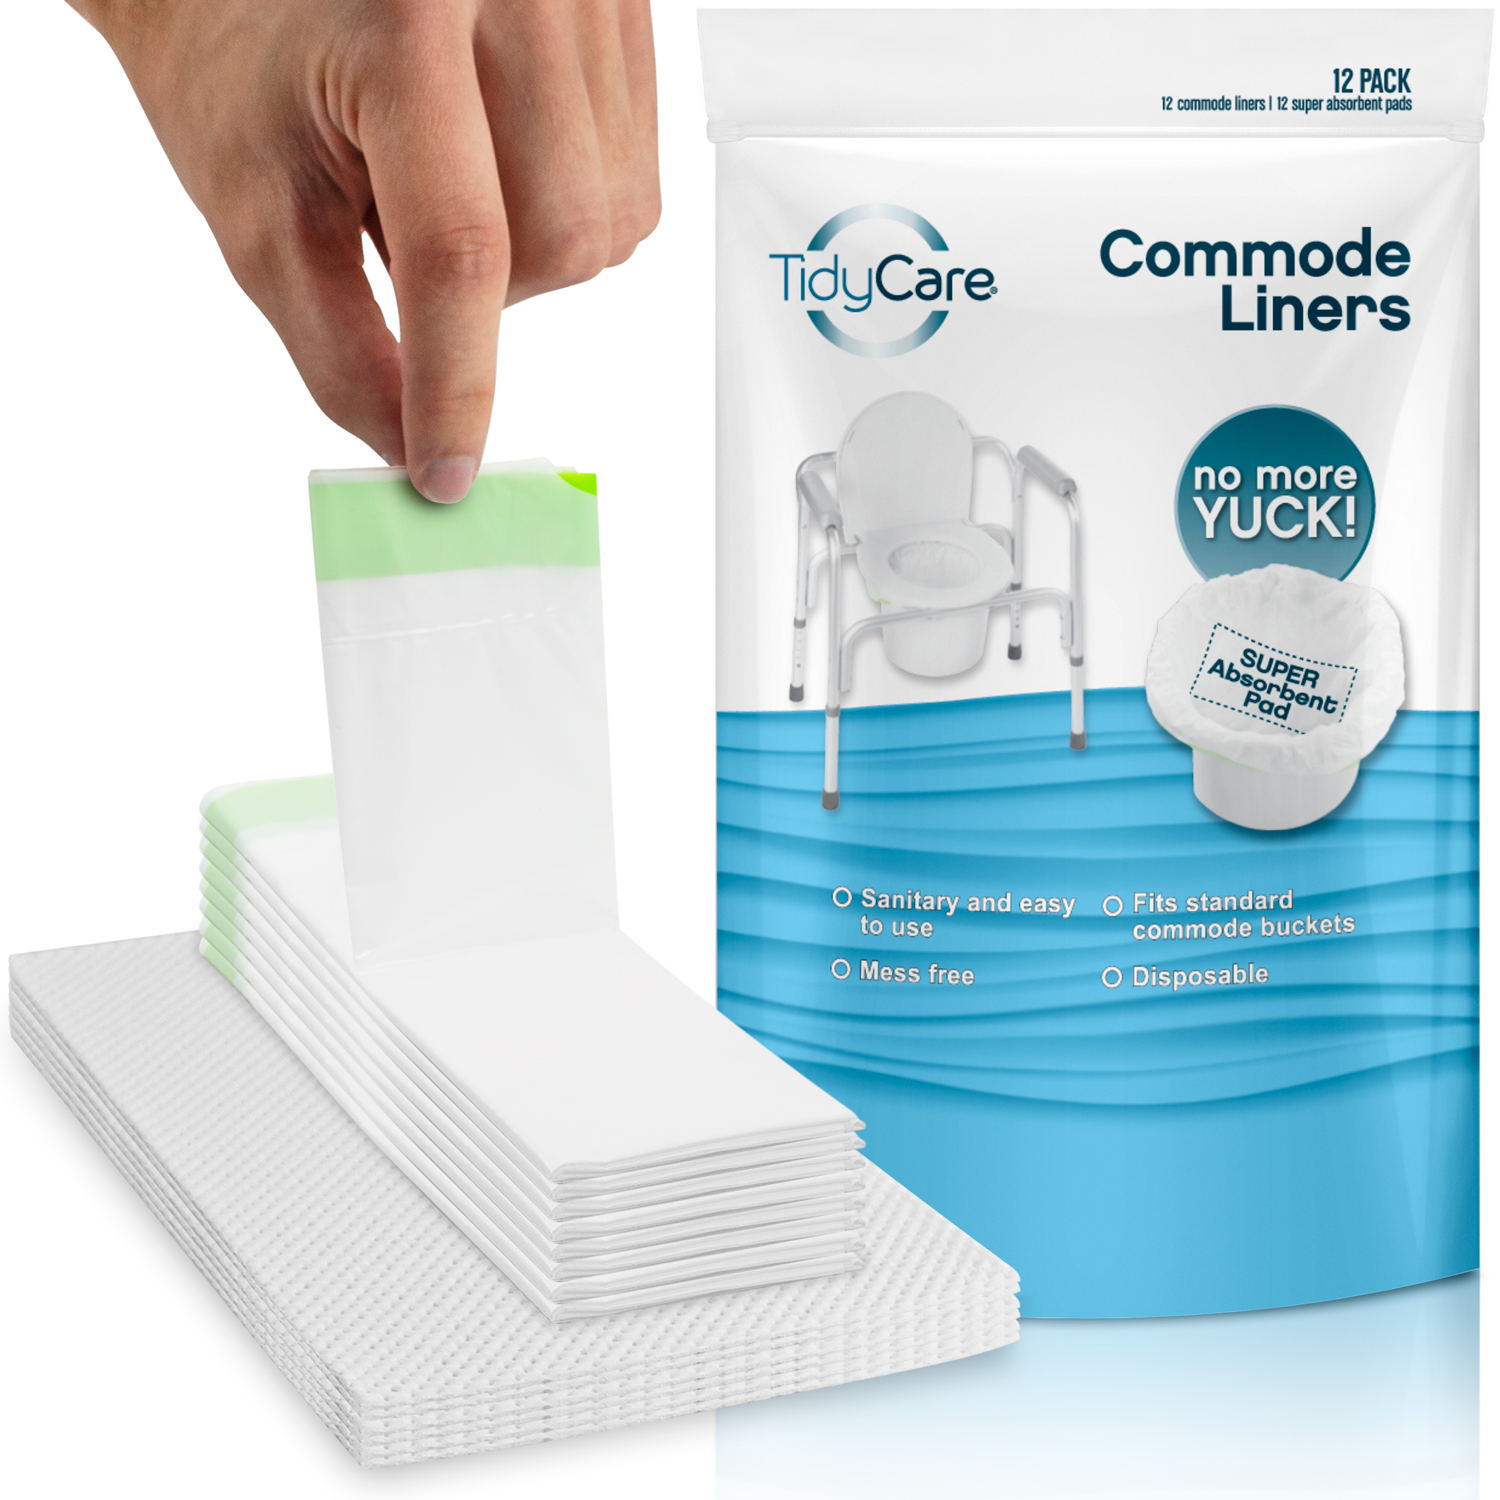 Comfort Wear Disposable Absorbent Liners 25 Pcs 4x10 Inches for